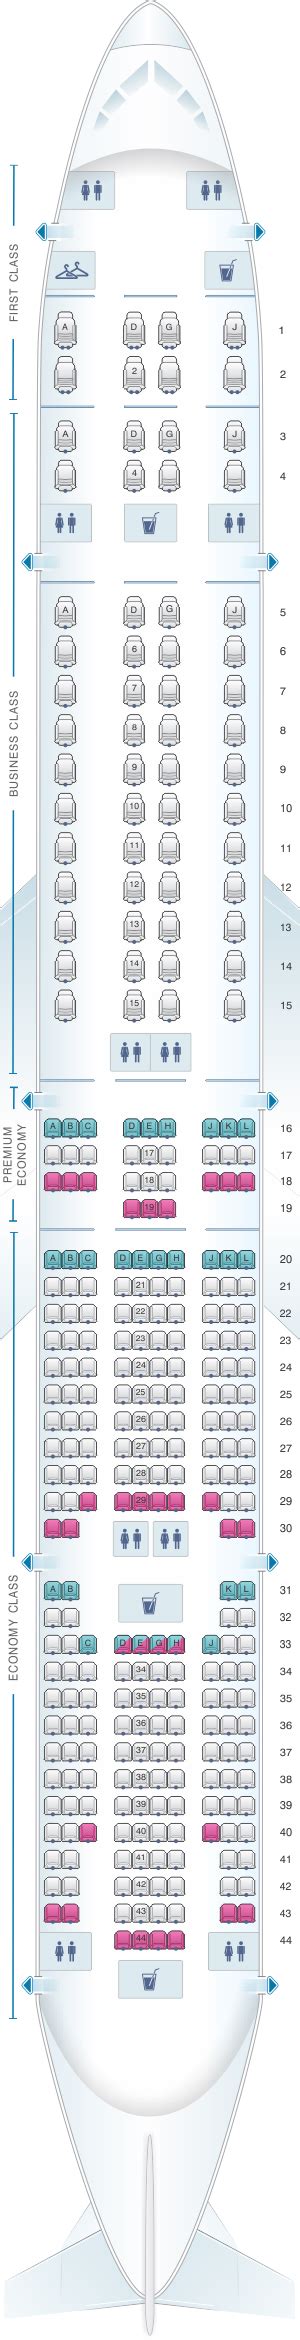 Boeing 777 300er seat map american airlines. 43G. this seat may have limited recline. this seat is near the galley. 44G. this seat has extra legroom. no underseat stowage. no under-seat stowage during takeoff and landing. traytable in armrest means narrower seat. 33E. 